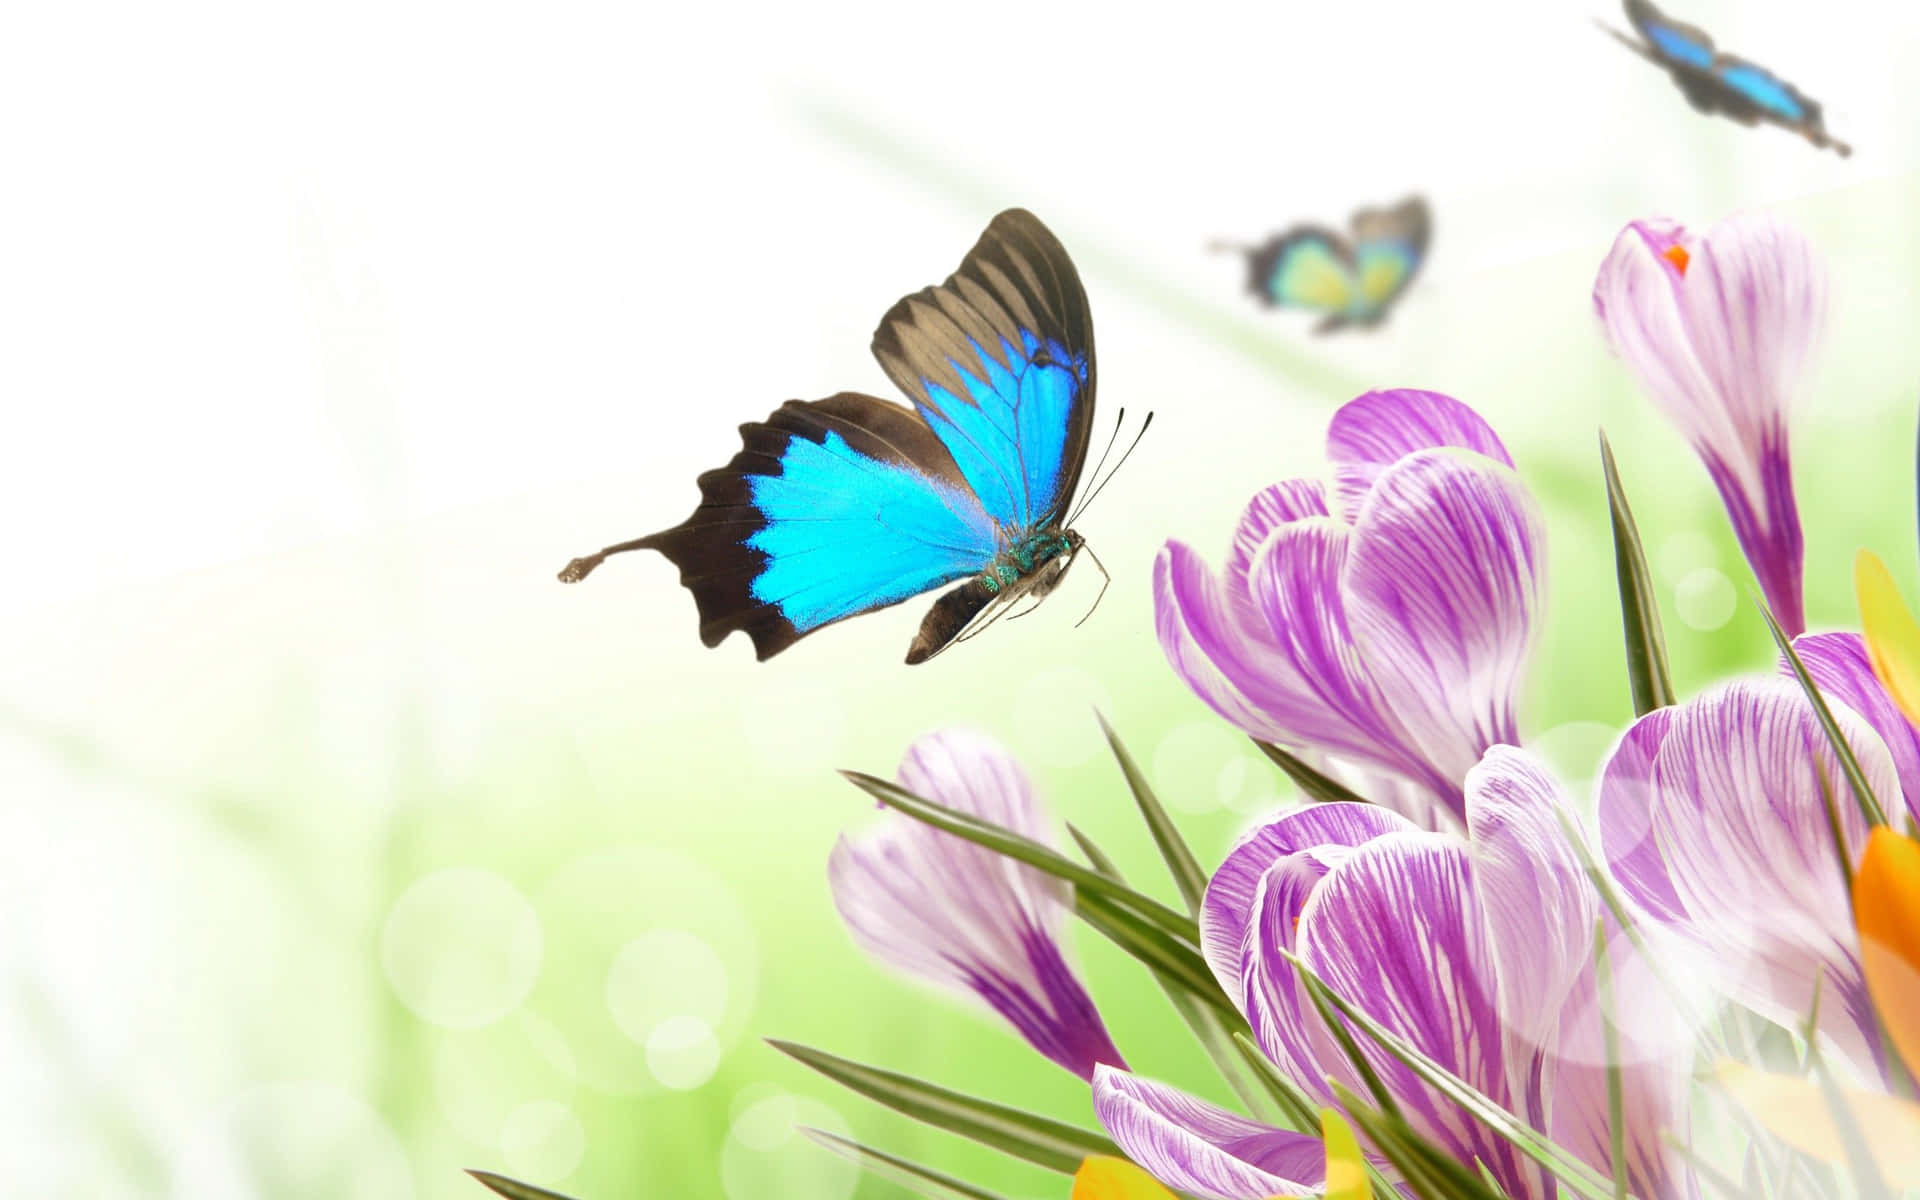 "The Beauty of Nature: A Butterfly Lifts Off"